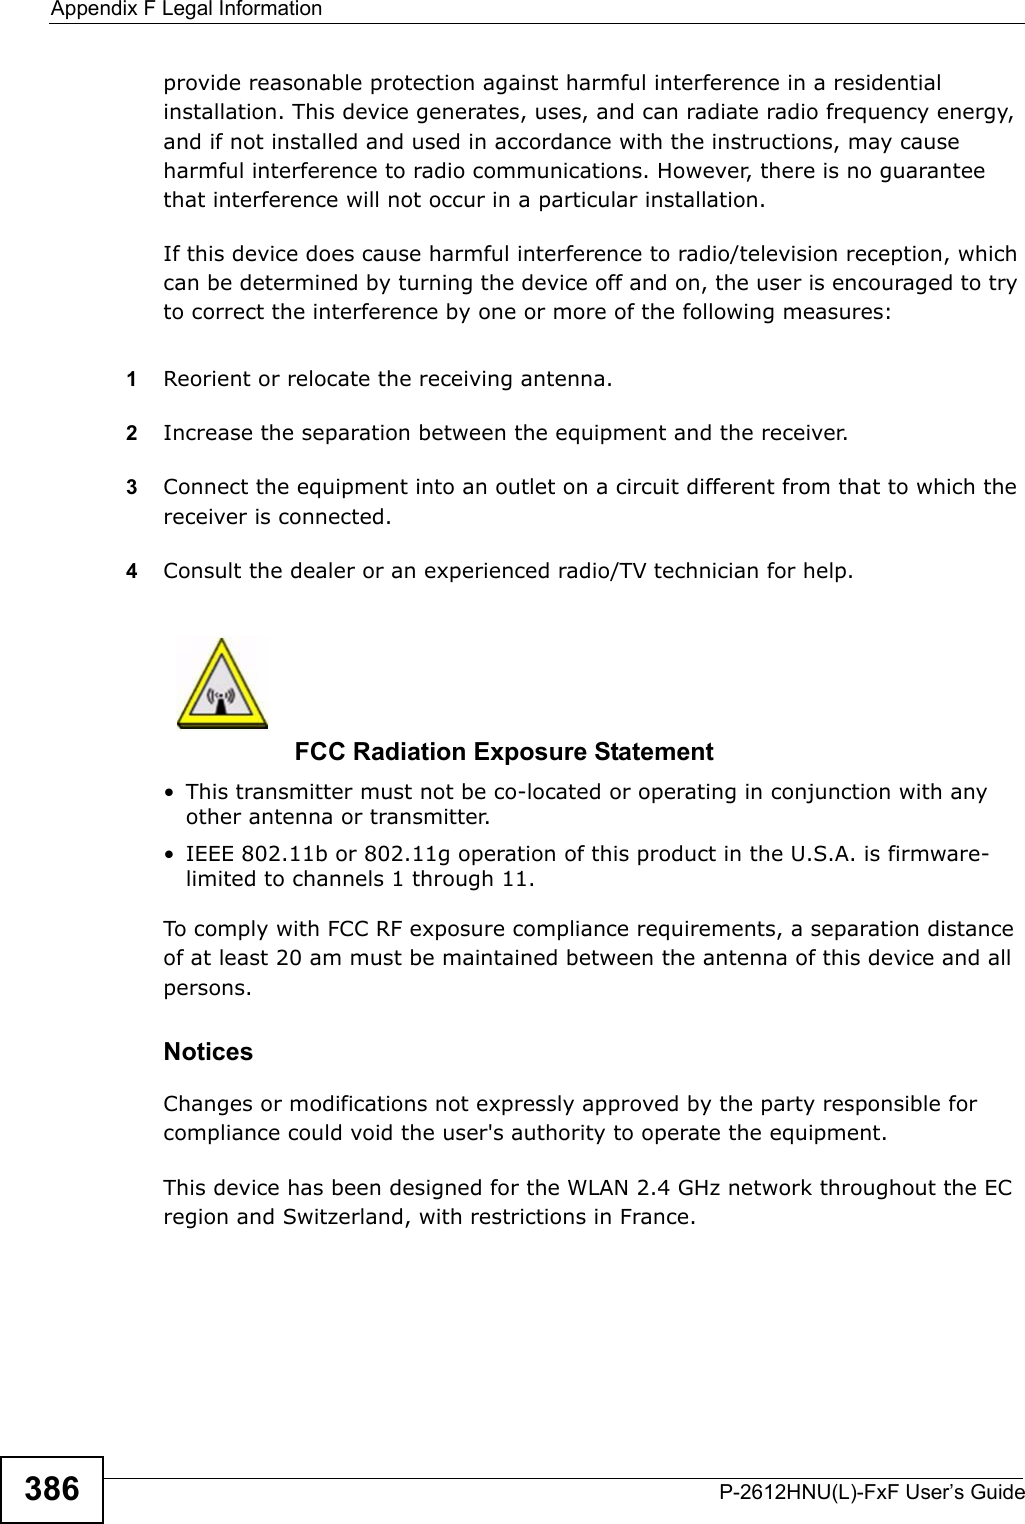 Appendix F Legal InformationP-2612HNU(L)-FxF User’s Guide386provide reasonable protection against harmful interference in a residential installation. This device generates, uses, and can radiate radio frequency energy,and if not installed and used in accordance with the instructions, may causeharmful interference to radio communications. However, there is no guarantee that interference will not occur in a particular installation.If this device does cause harmful interference to radio/television reception, which can be determined by turning the device off and on, the user is encouraged to try to correct the interference by one or more of the following measures:1Reorient or relocate the receiving antenna.2Increase the separation between the equipment and the receiver.3Connect the equipment into an outlet on a circuit different from that to which the receiver is connected.4Consult the dealer or an experienced radio/TV technician for help.FCC Radiation Exposure Statement• This transmitter must not be co-located or operating in conjunction with any other antenna or transmitter.• IEEE 802.11b or 802.11g operation of this product in the U.S.A. is firmware-limited to channels 1 through 11. To comply with FCC RF exposure compliance requirements, a separation distance of at least 20 am must be maintained between the antenna of this device and all persons. Notices Changes or modifications not expressly approved by the party responsible for compliance could void the user&apos;s authority to operate the equipment.This device has been designed for the WLAN 2.4 GHz network throughout the ECregion and Switzerland, with restrictions in France. 